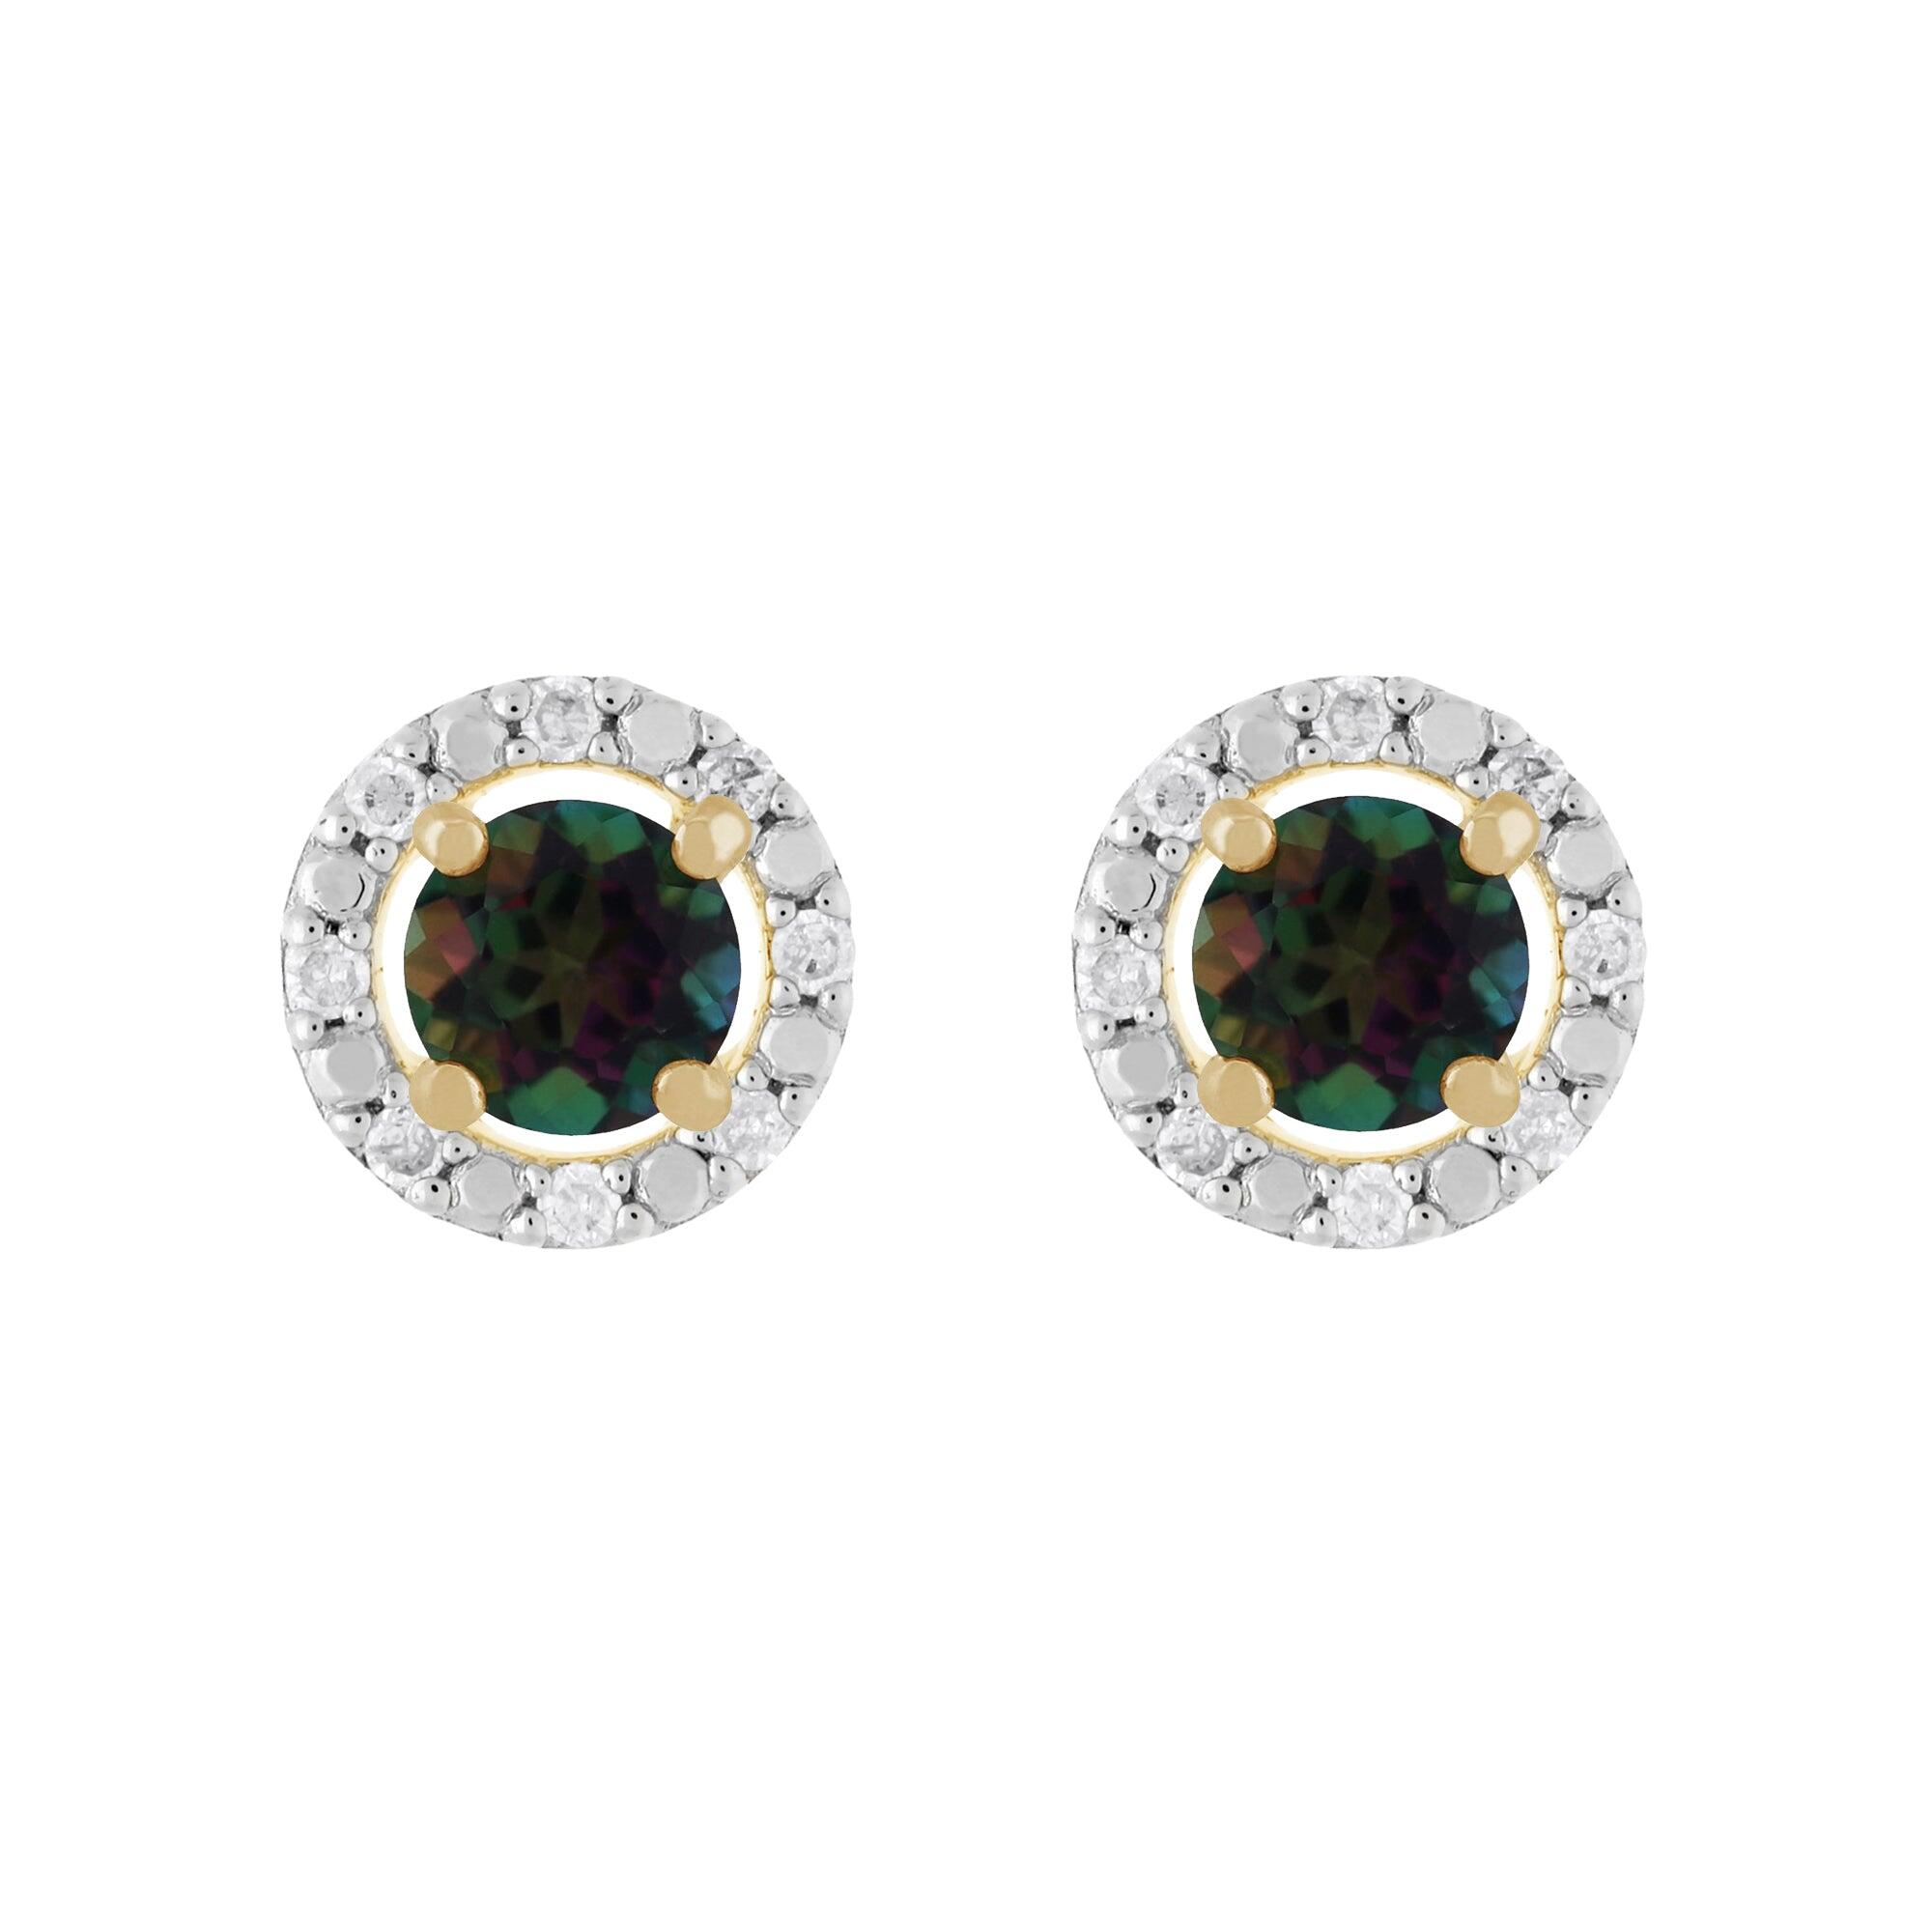 Classic Round Mystic Topaz Stud Earrings with Detachable Diamond Round Earrings Jacket Set in 9ct Yellow Gold